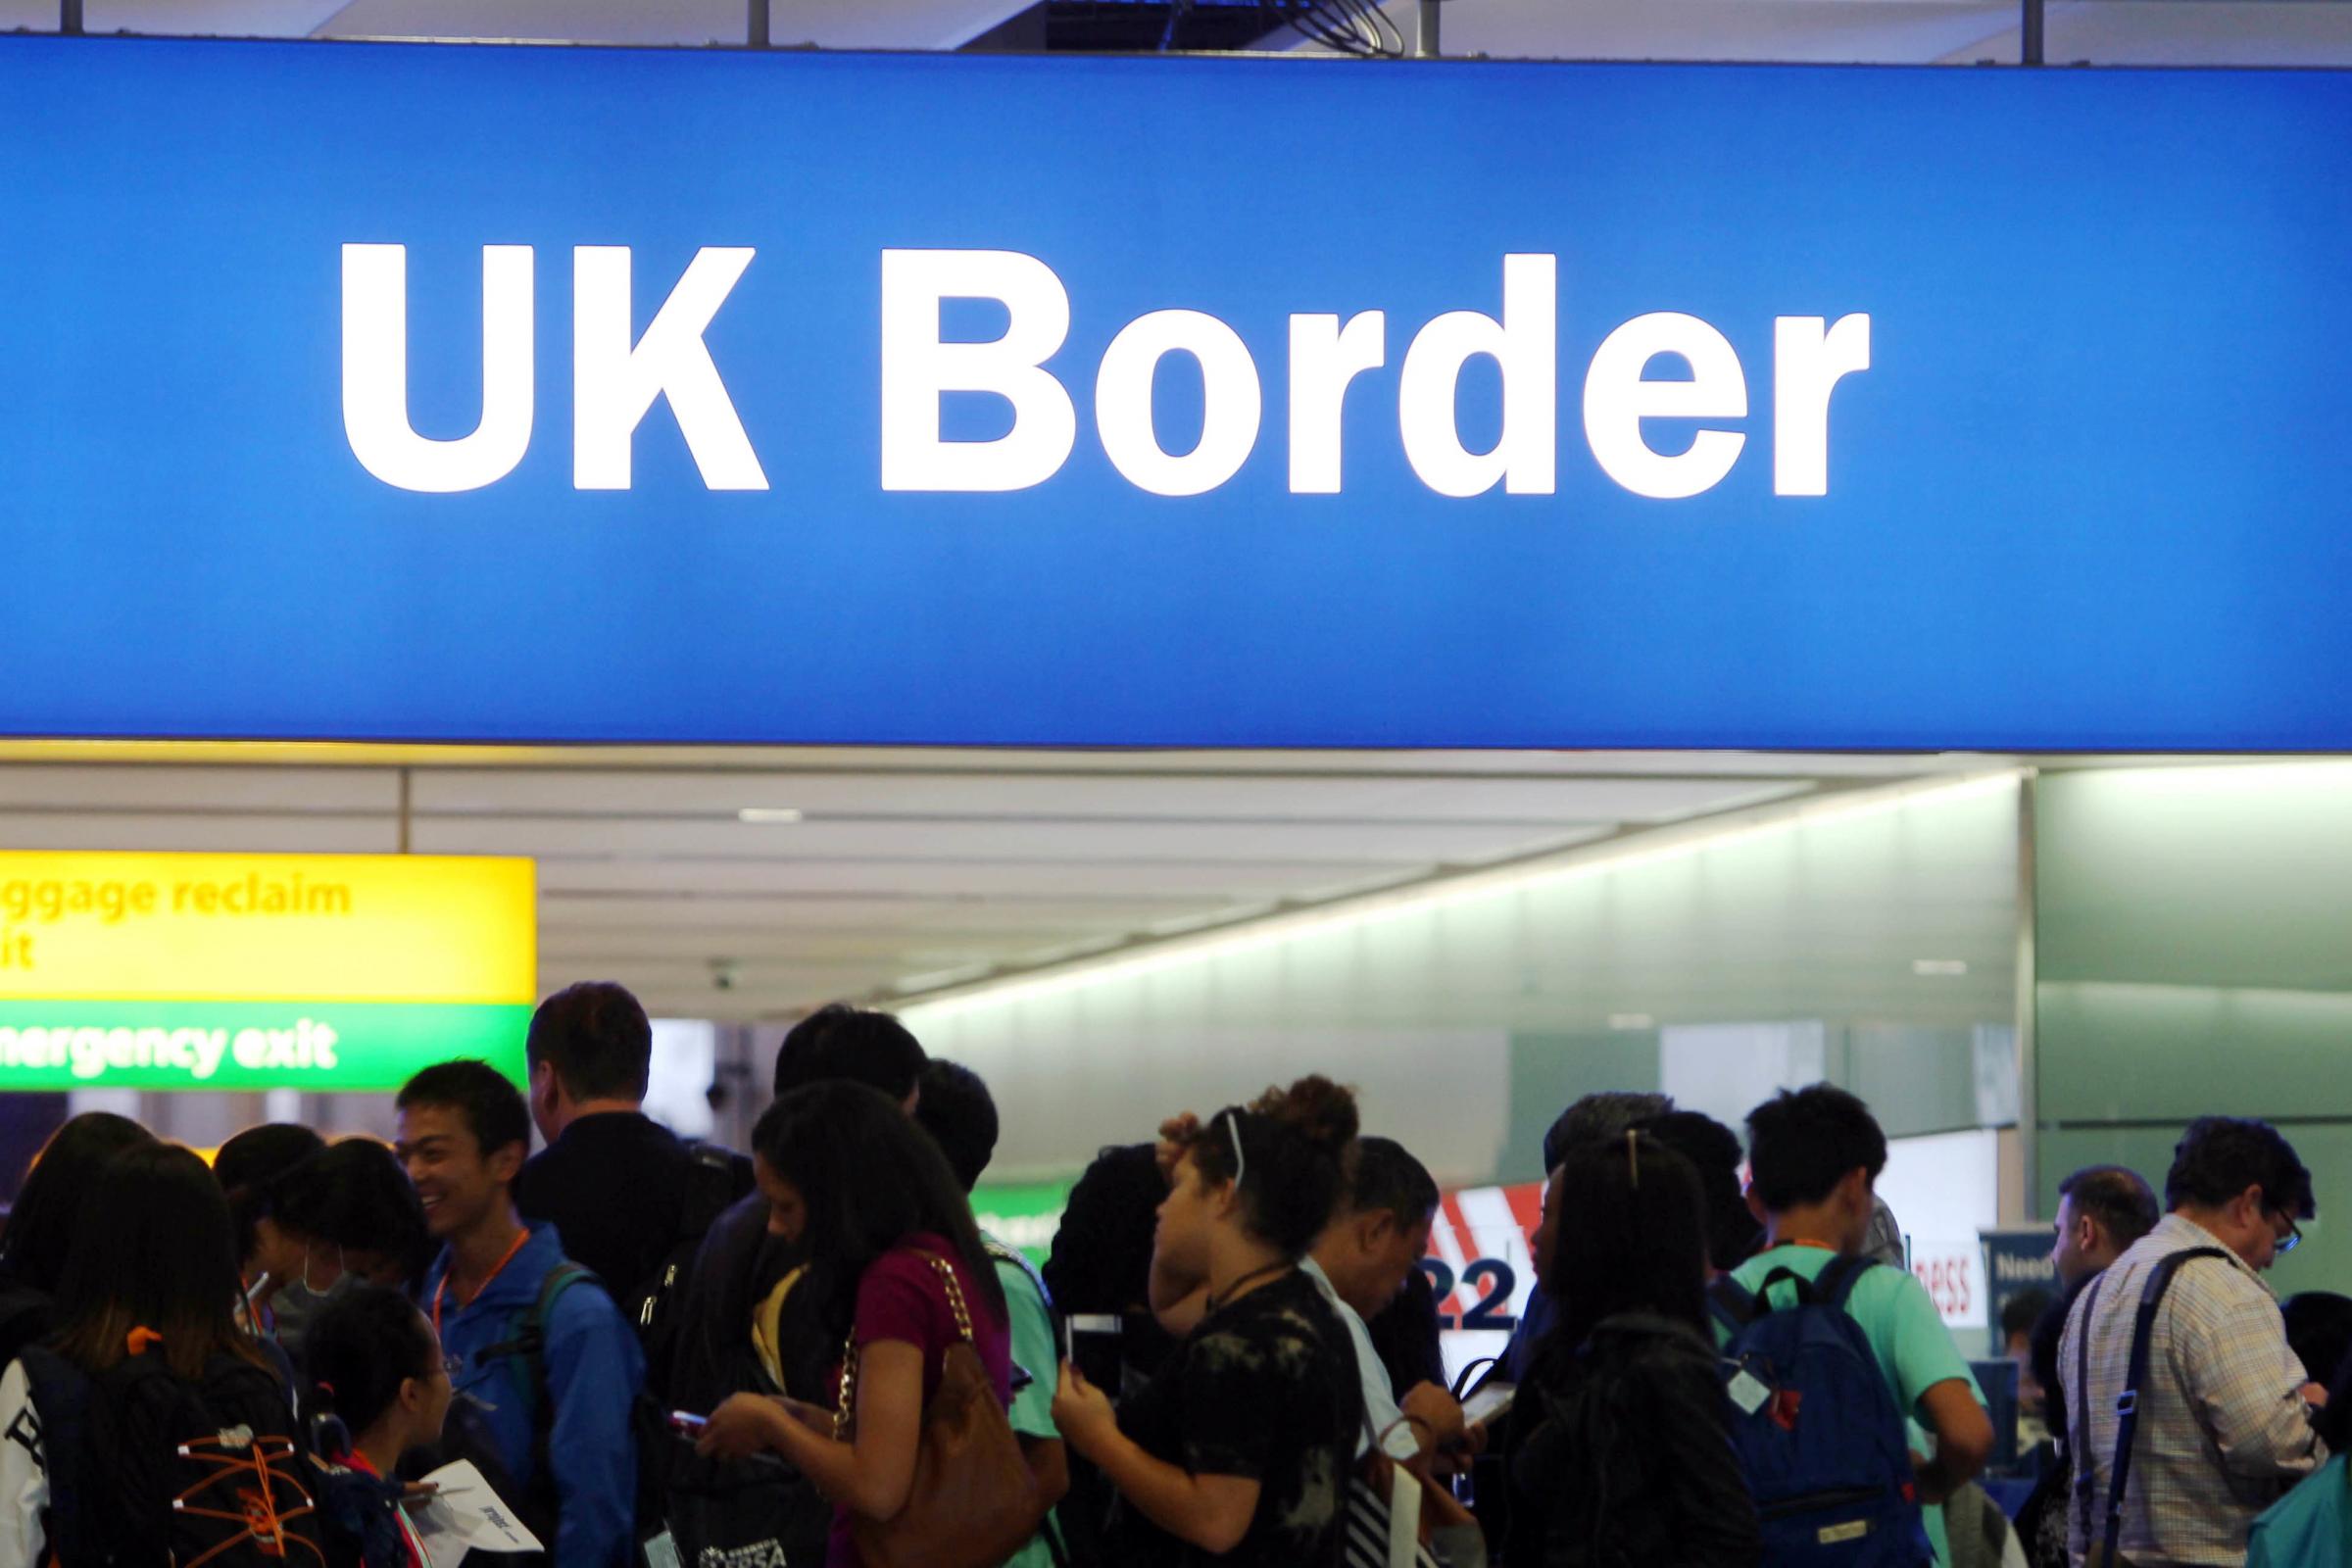 How would the political parties approach immigration? - The Bolton News